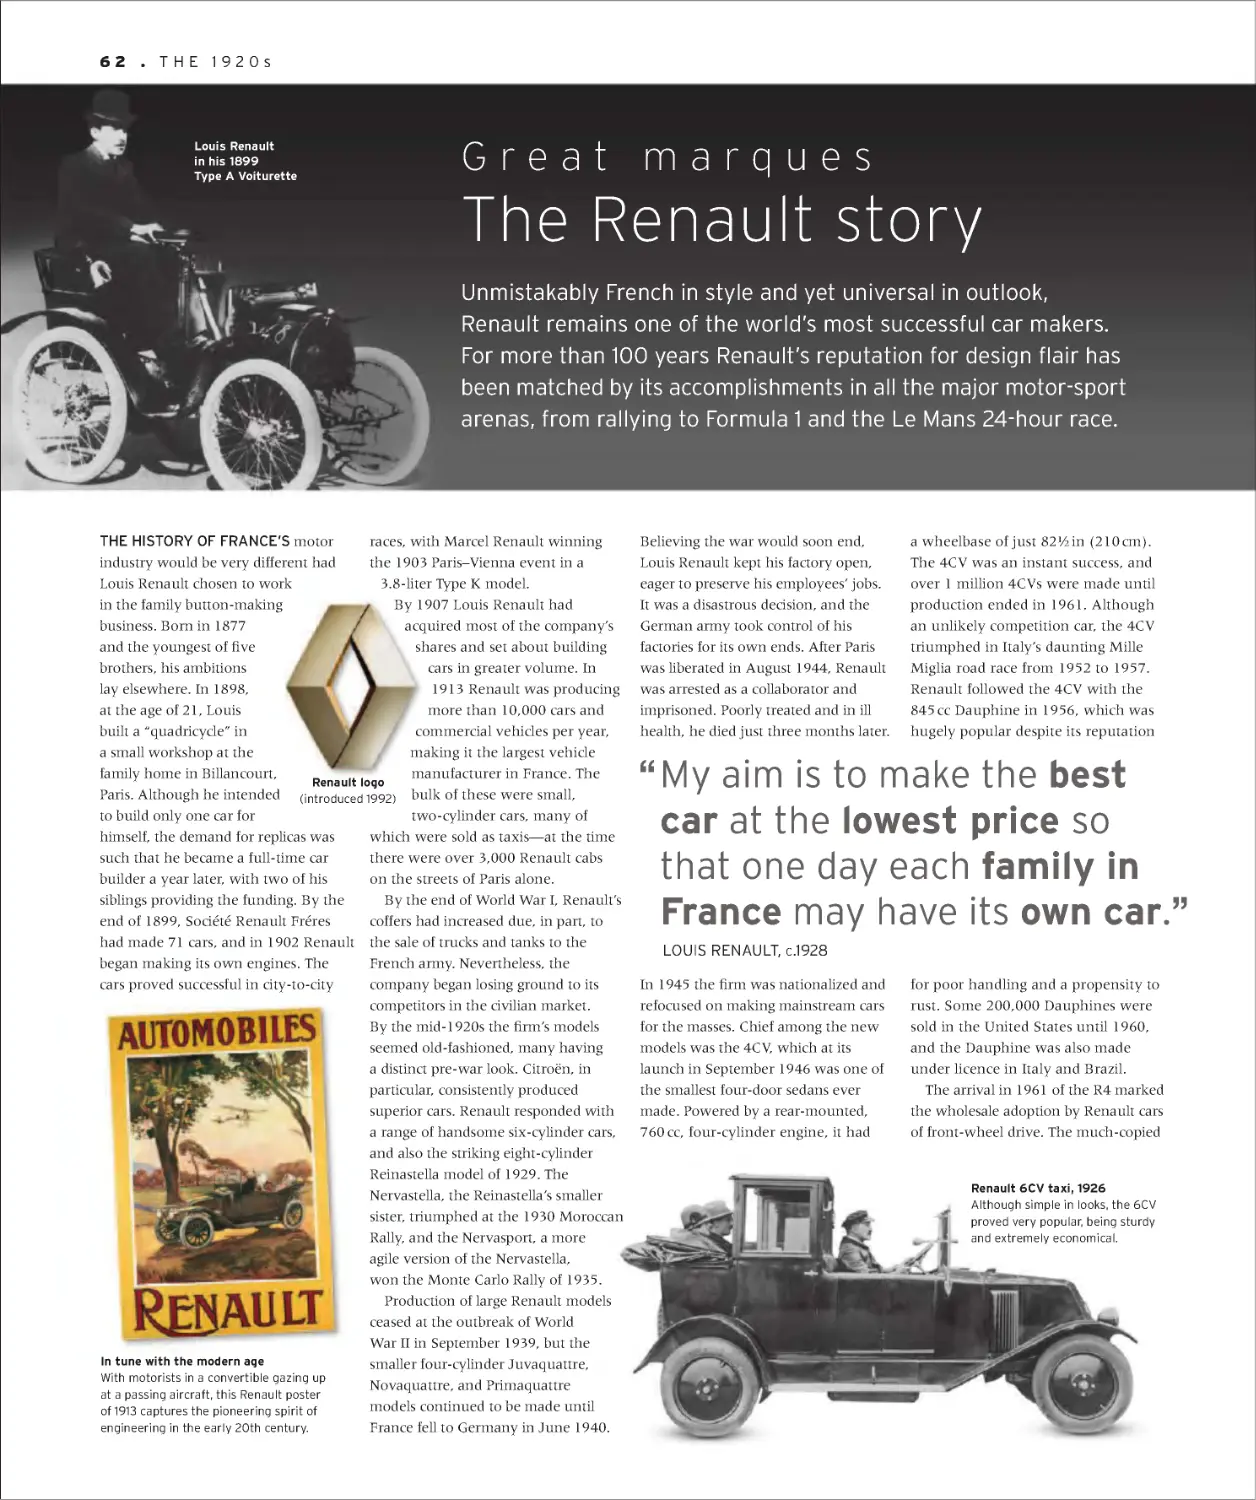 Great marques: The Renault story 62